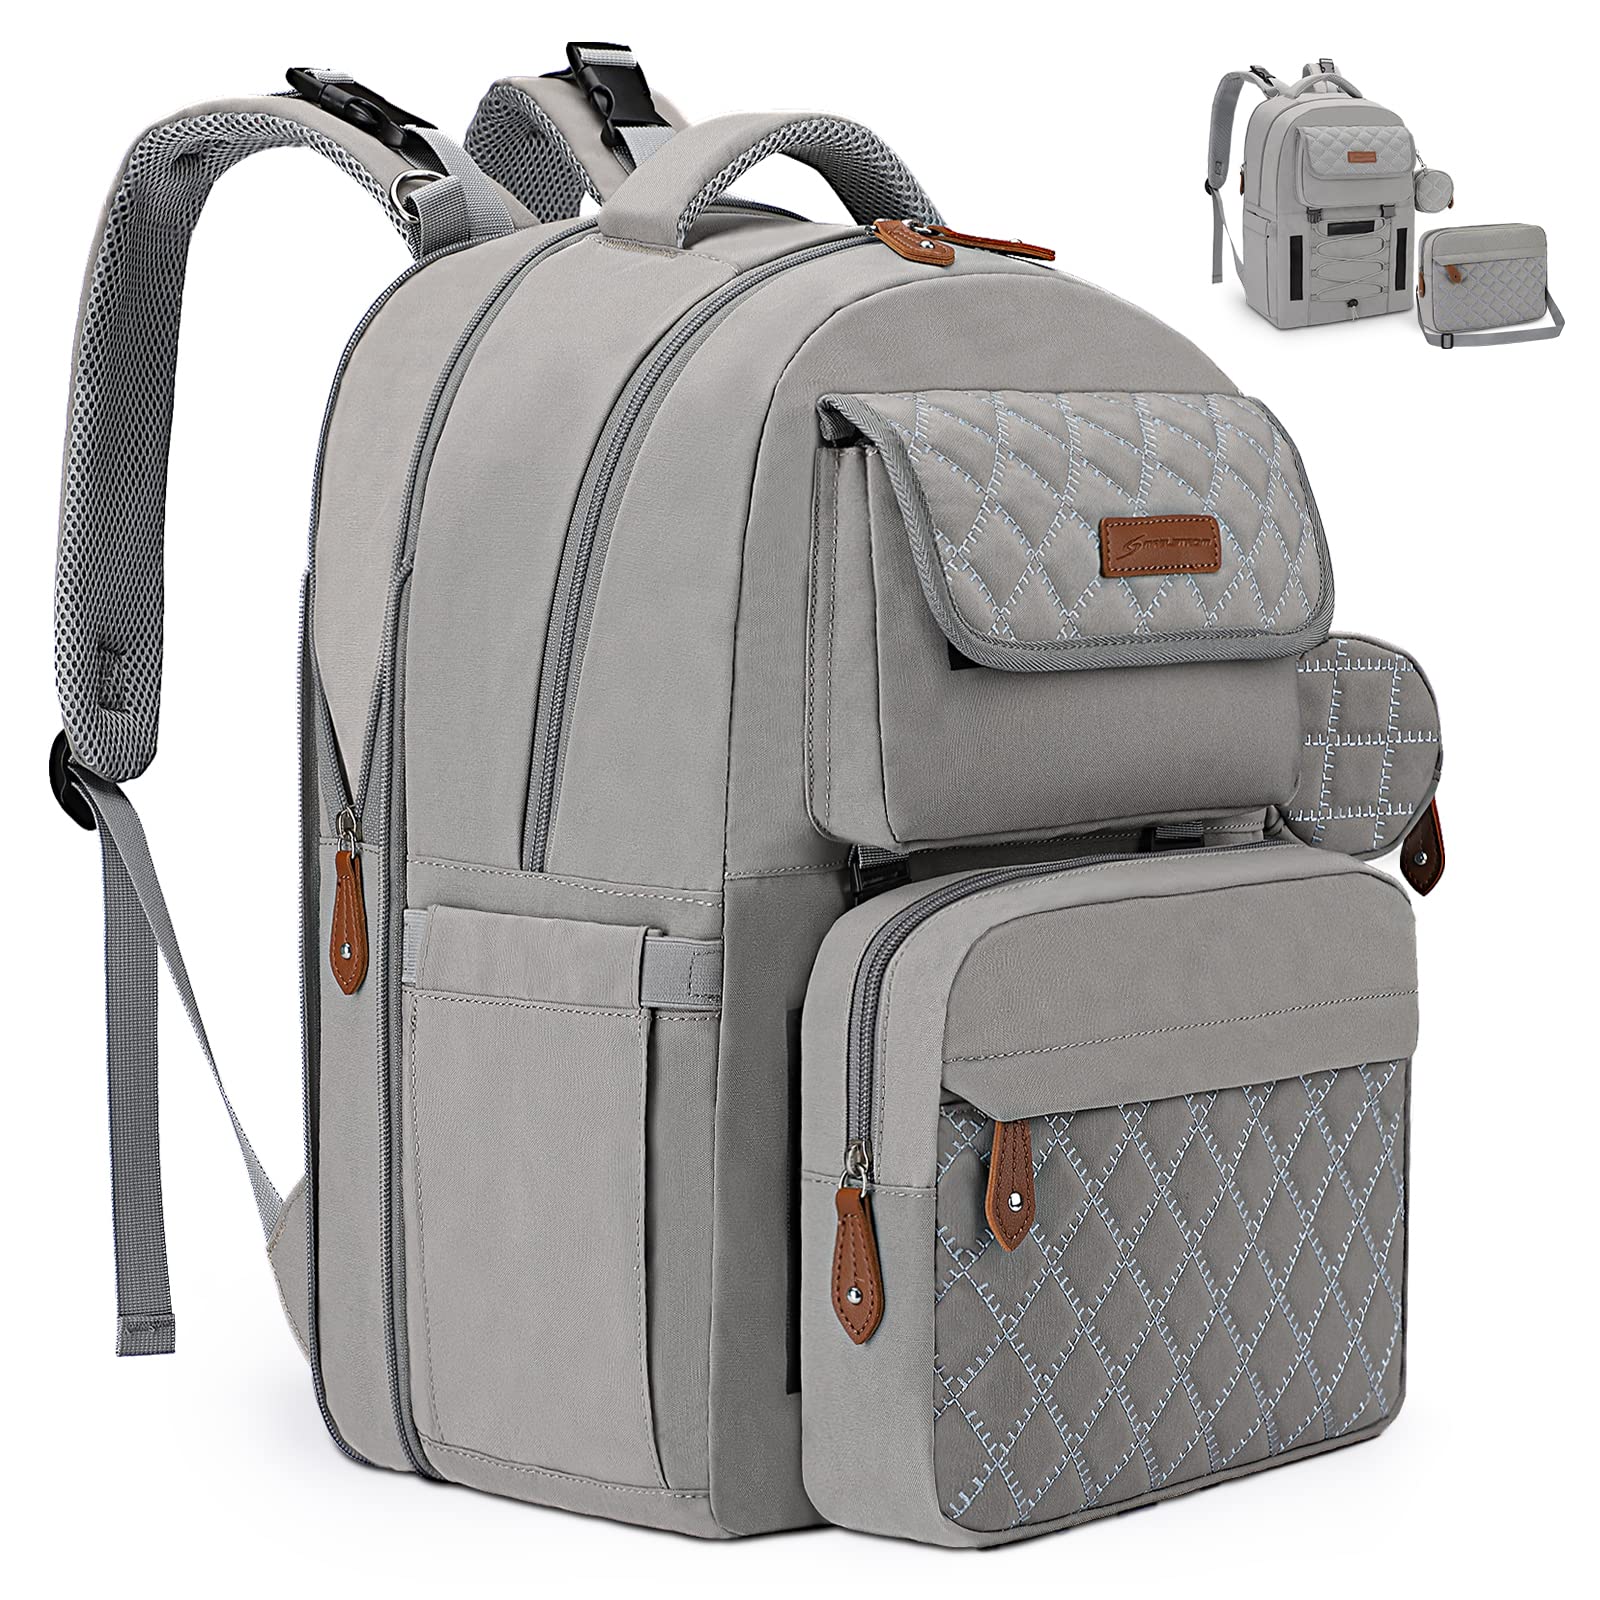 Maelstrom Large Diaper Bag,29L-45L Expandable Diaper Bag Backpack for 2 Kids/Twins, with Removable Cross Body Bottle Bag for Mom/Dad,Stylish Baby Bag Gift for Boys/Girl-Mothers Day Gifts-Grey